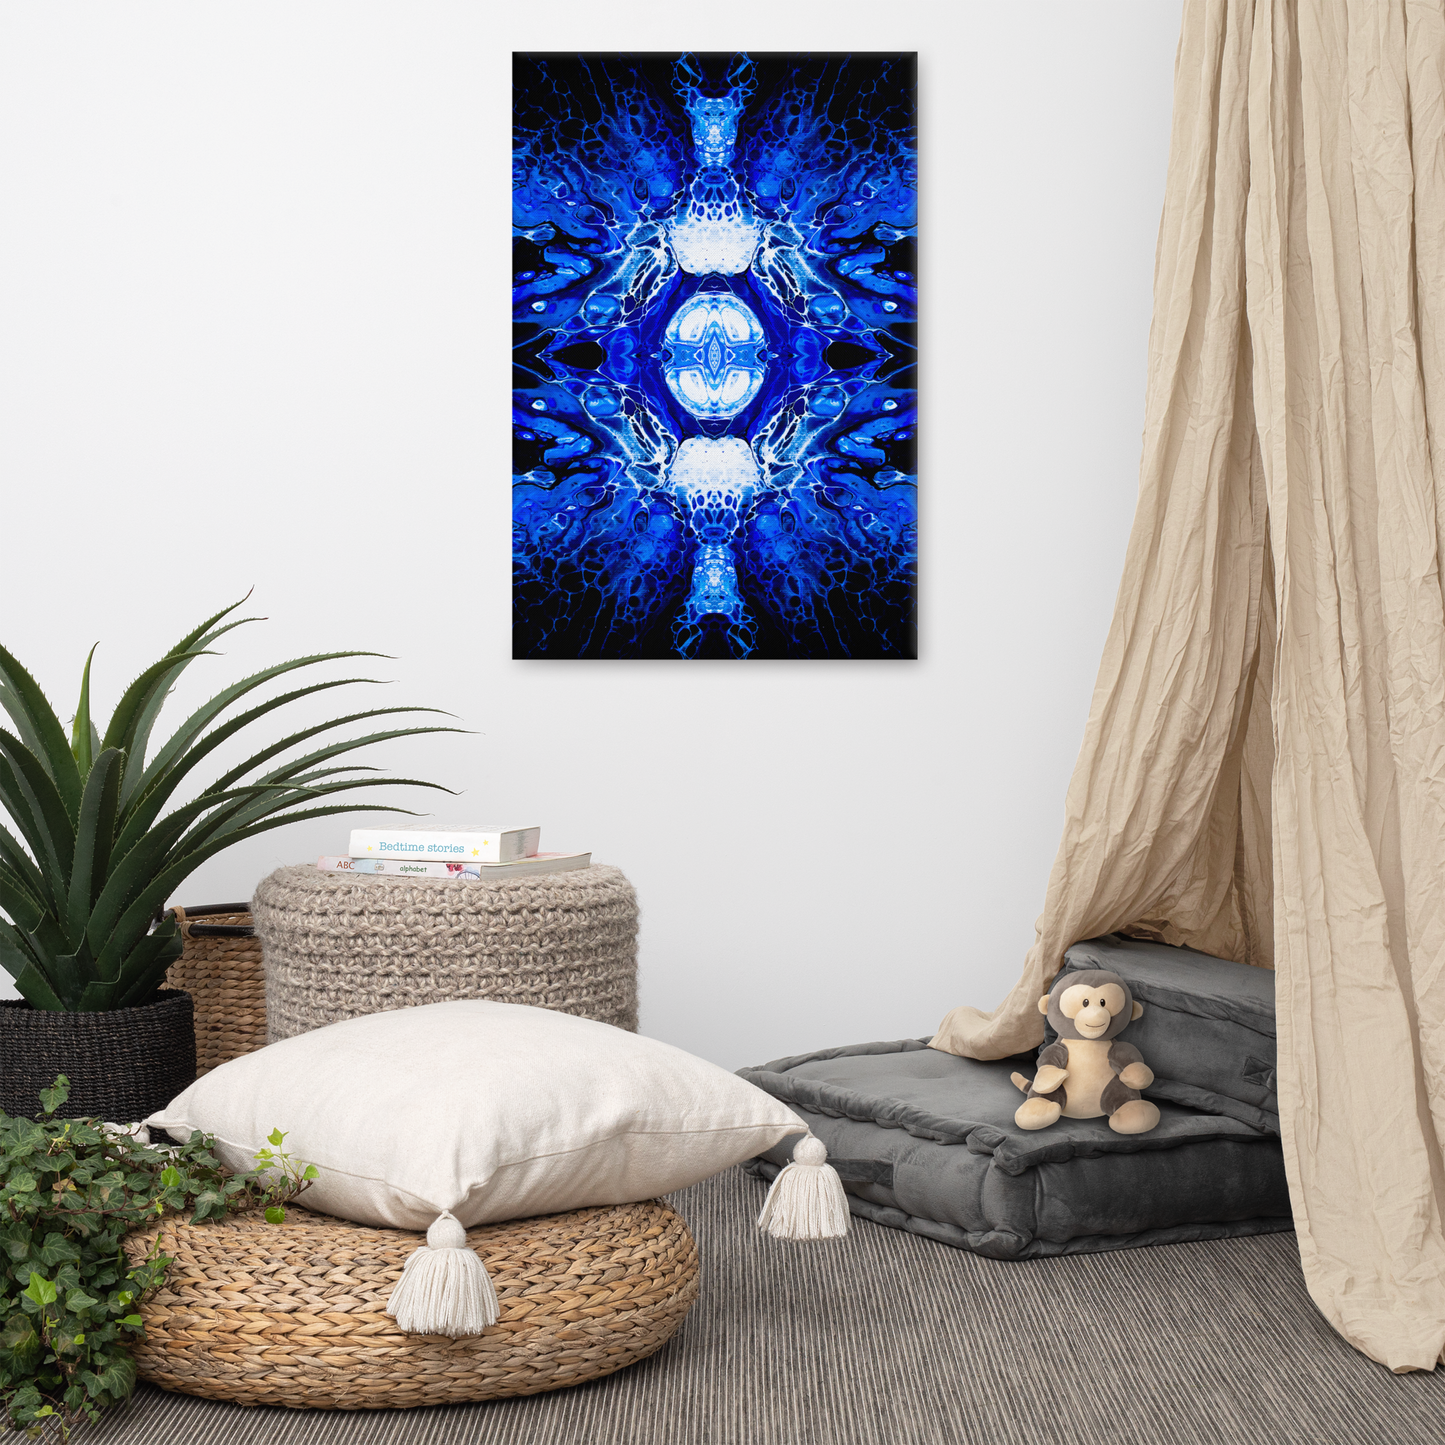 NightOwl Studio Abstract Wall Art, Blue Nucleus, Boho Living Room, Bedroom, Office, and Home Decor, Premium Canvas with Wooden Frame, Acrylic Painting Reproduction, 24” x 36”